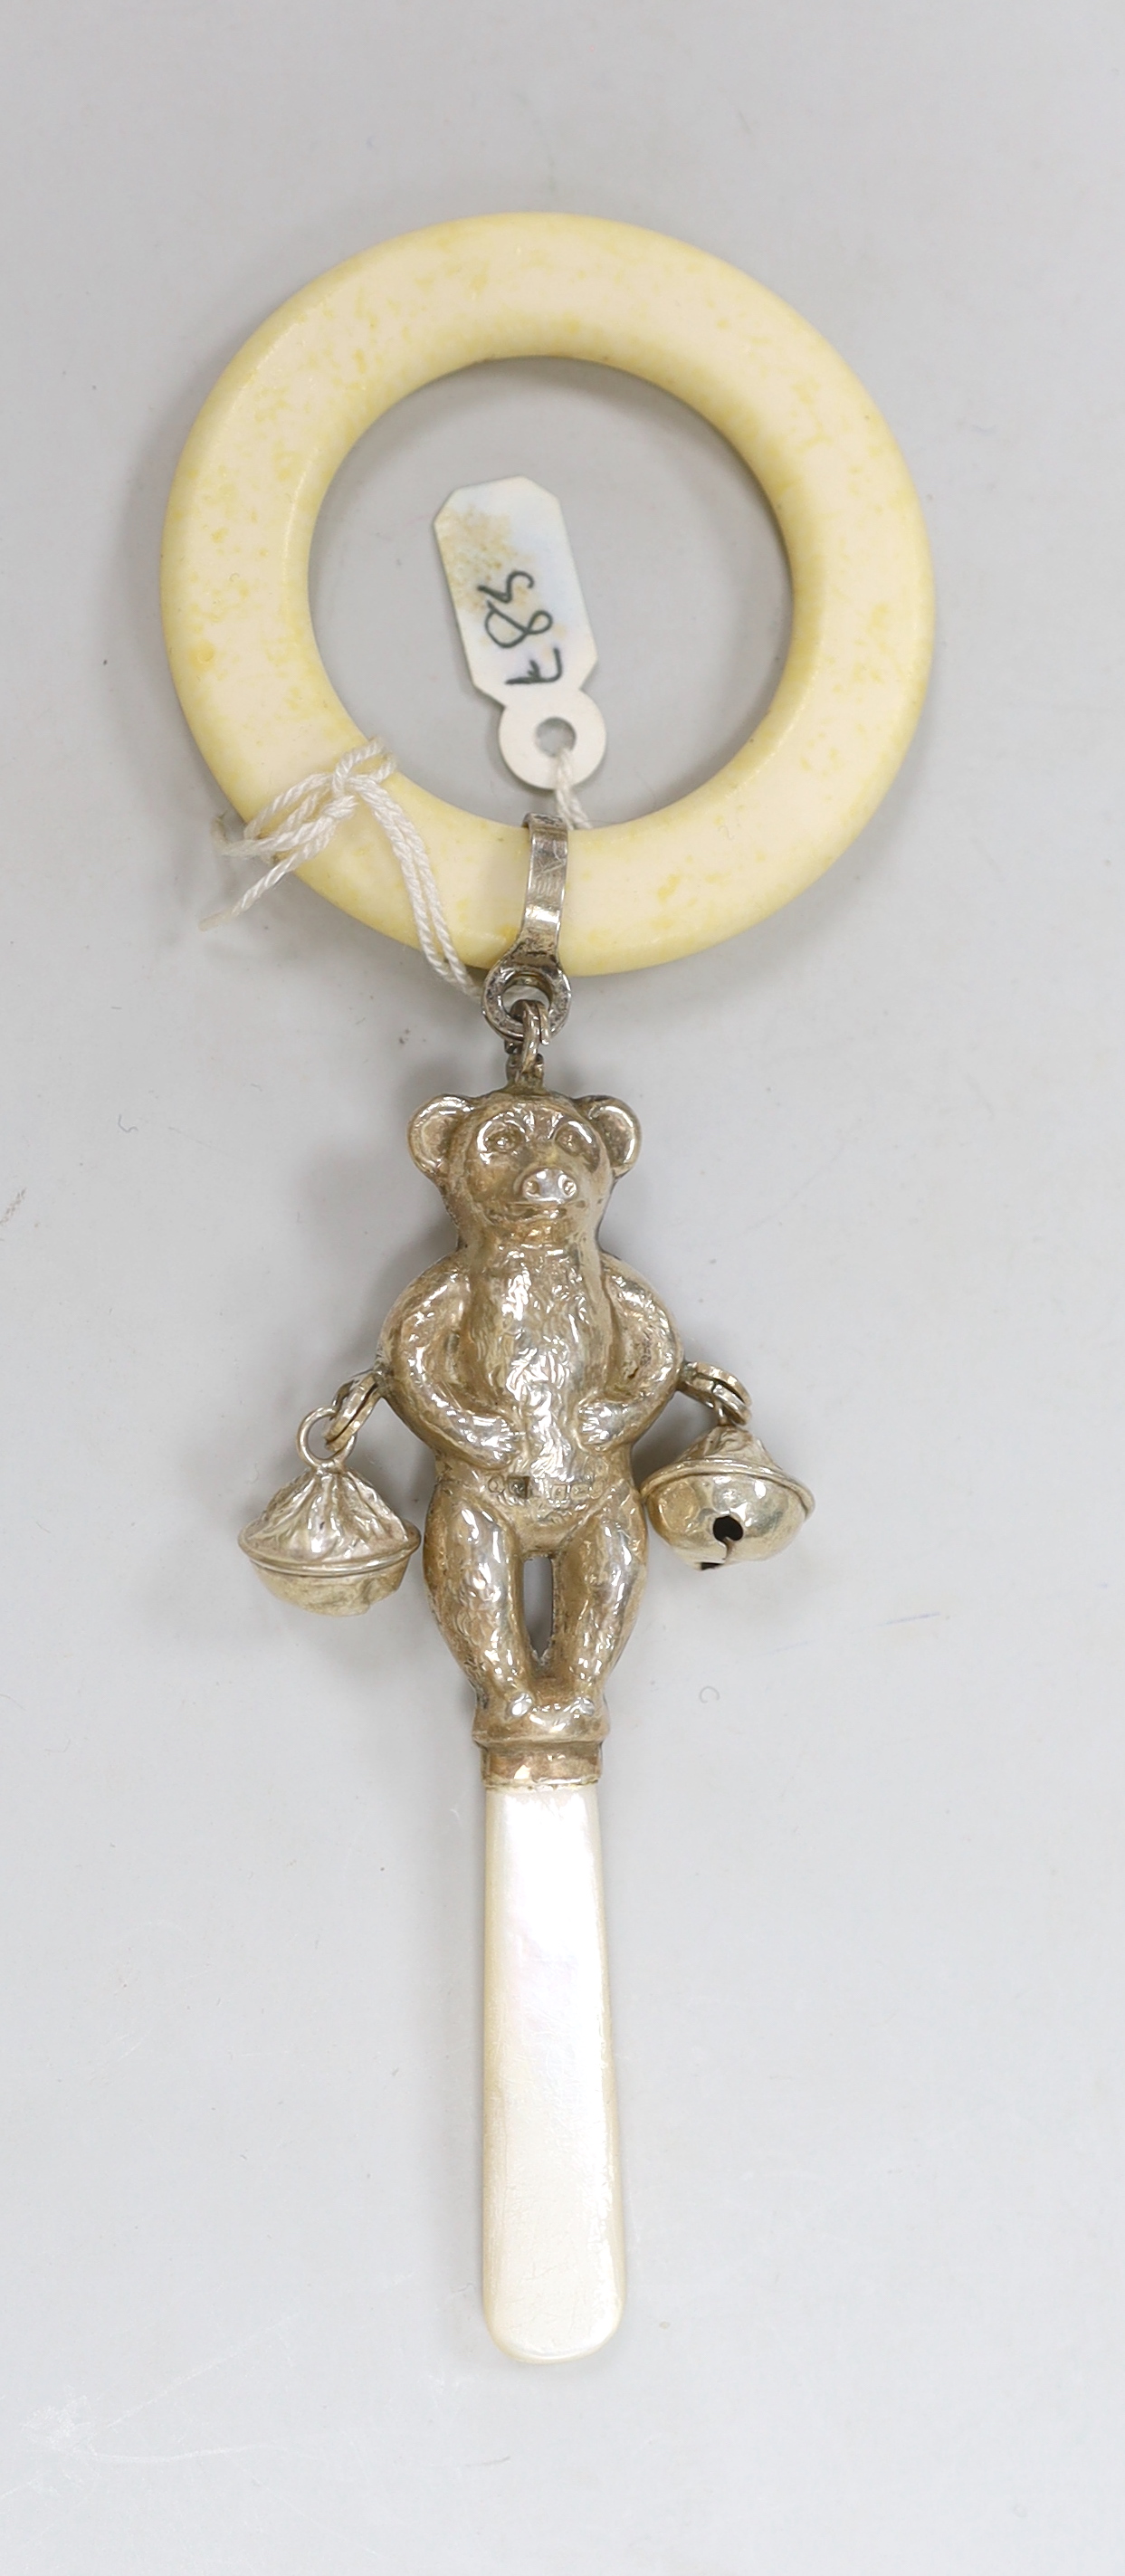 Two Edwardian hat pins with silver hallmarked teddy bea tops, and a silver 1960's teddy bear rattle - Image 4 of 9